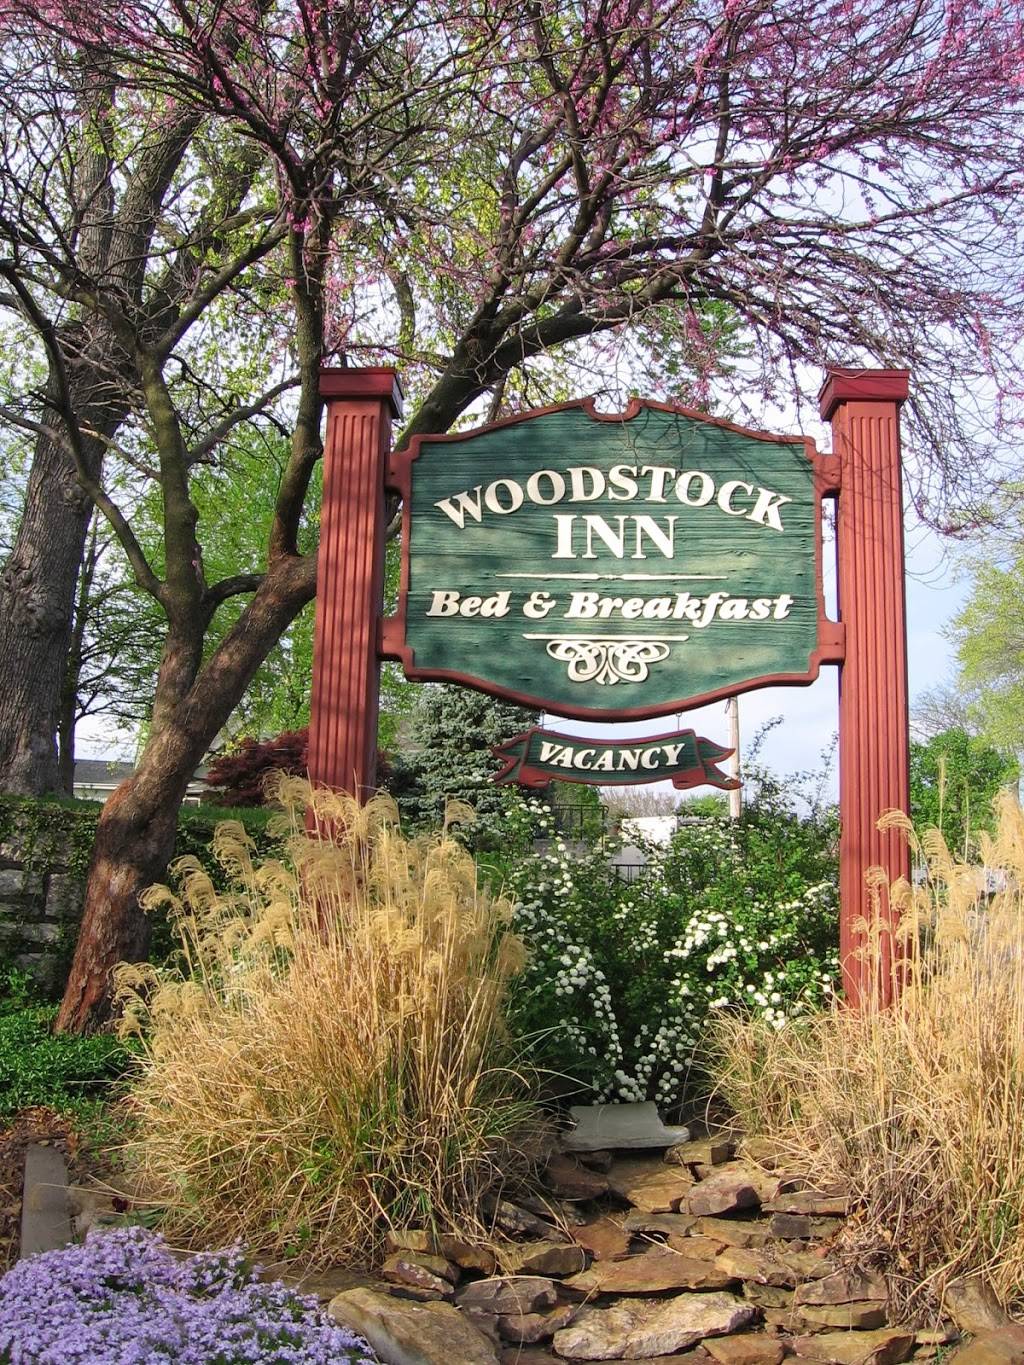 Woodstock Inn Bed & Breakfast | 1212 W Lexington Ave, Independence, MO 64050 | Phone: (816) 886-5656